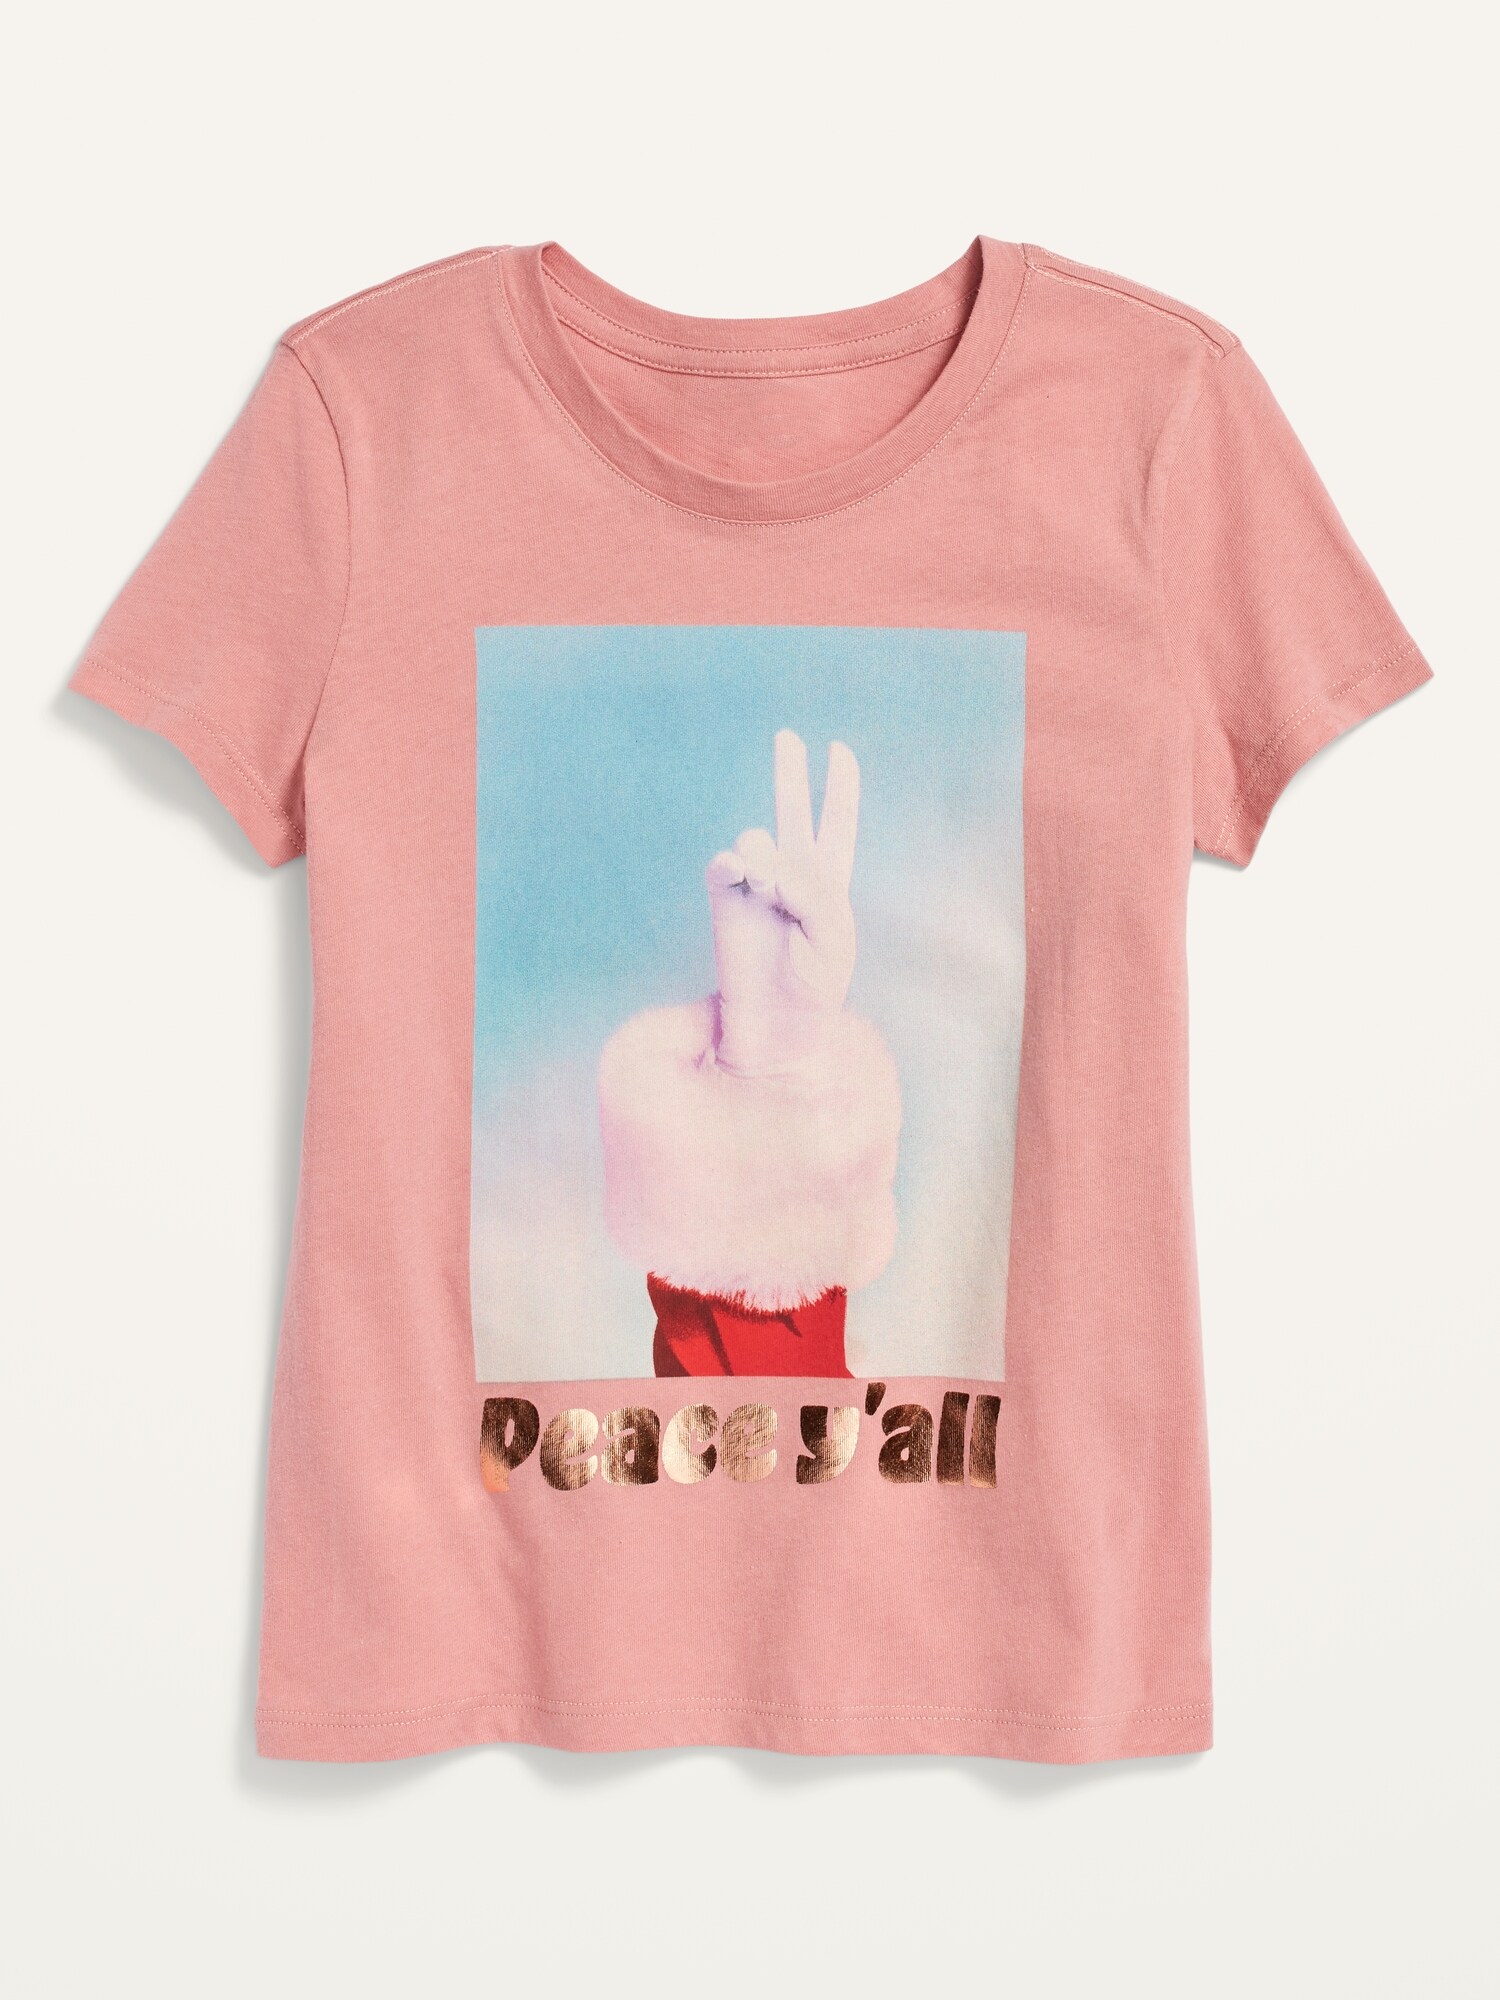 Short-Sleeve Holiday-Graphic Tee for Girls